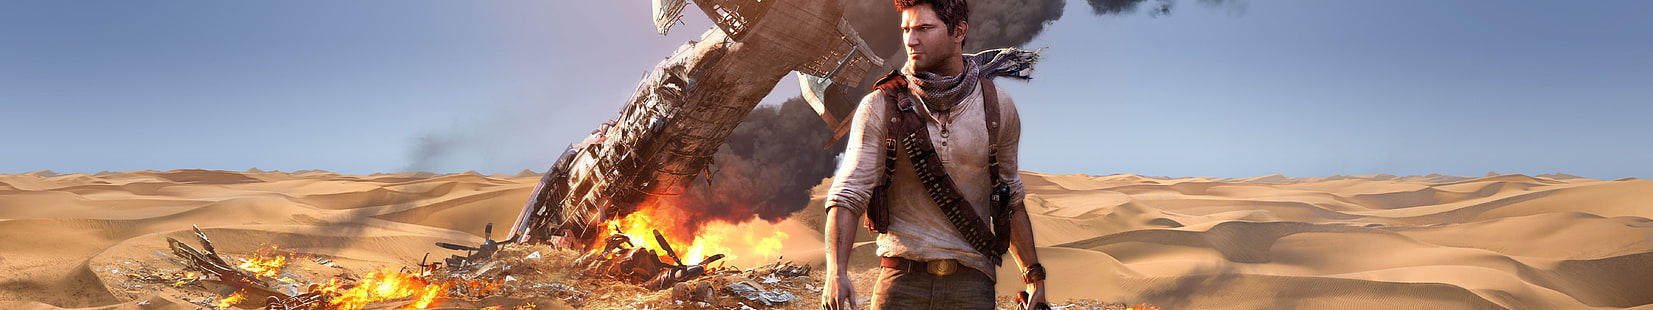 7680x1440 px uncharted Uncharted 3：ドレイクDeception Entertainment Funny HD Art、Uncharted、7680x1440 px、Uncharted 3：Drakesで、 HDデスクトップの壁紙 HD wallpaper